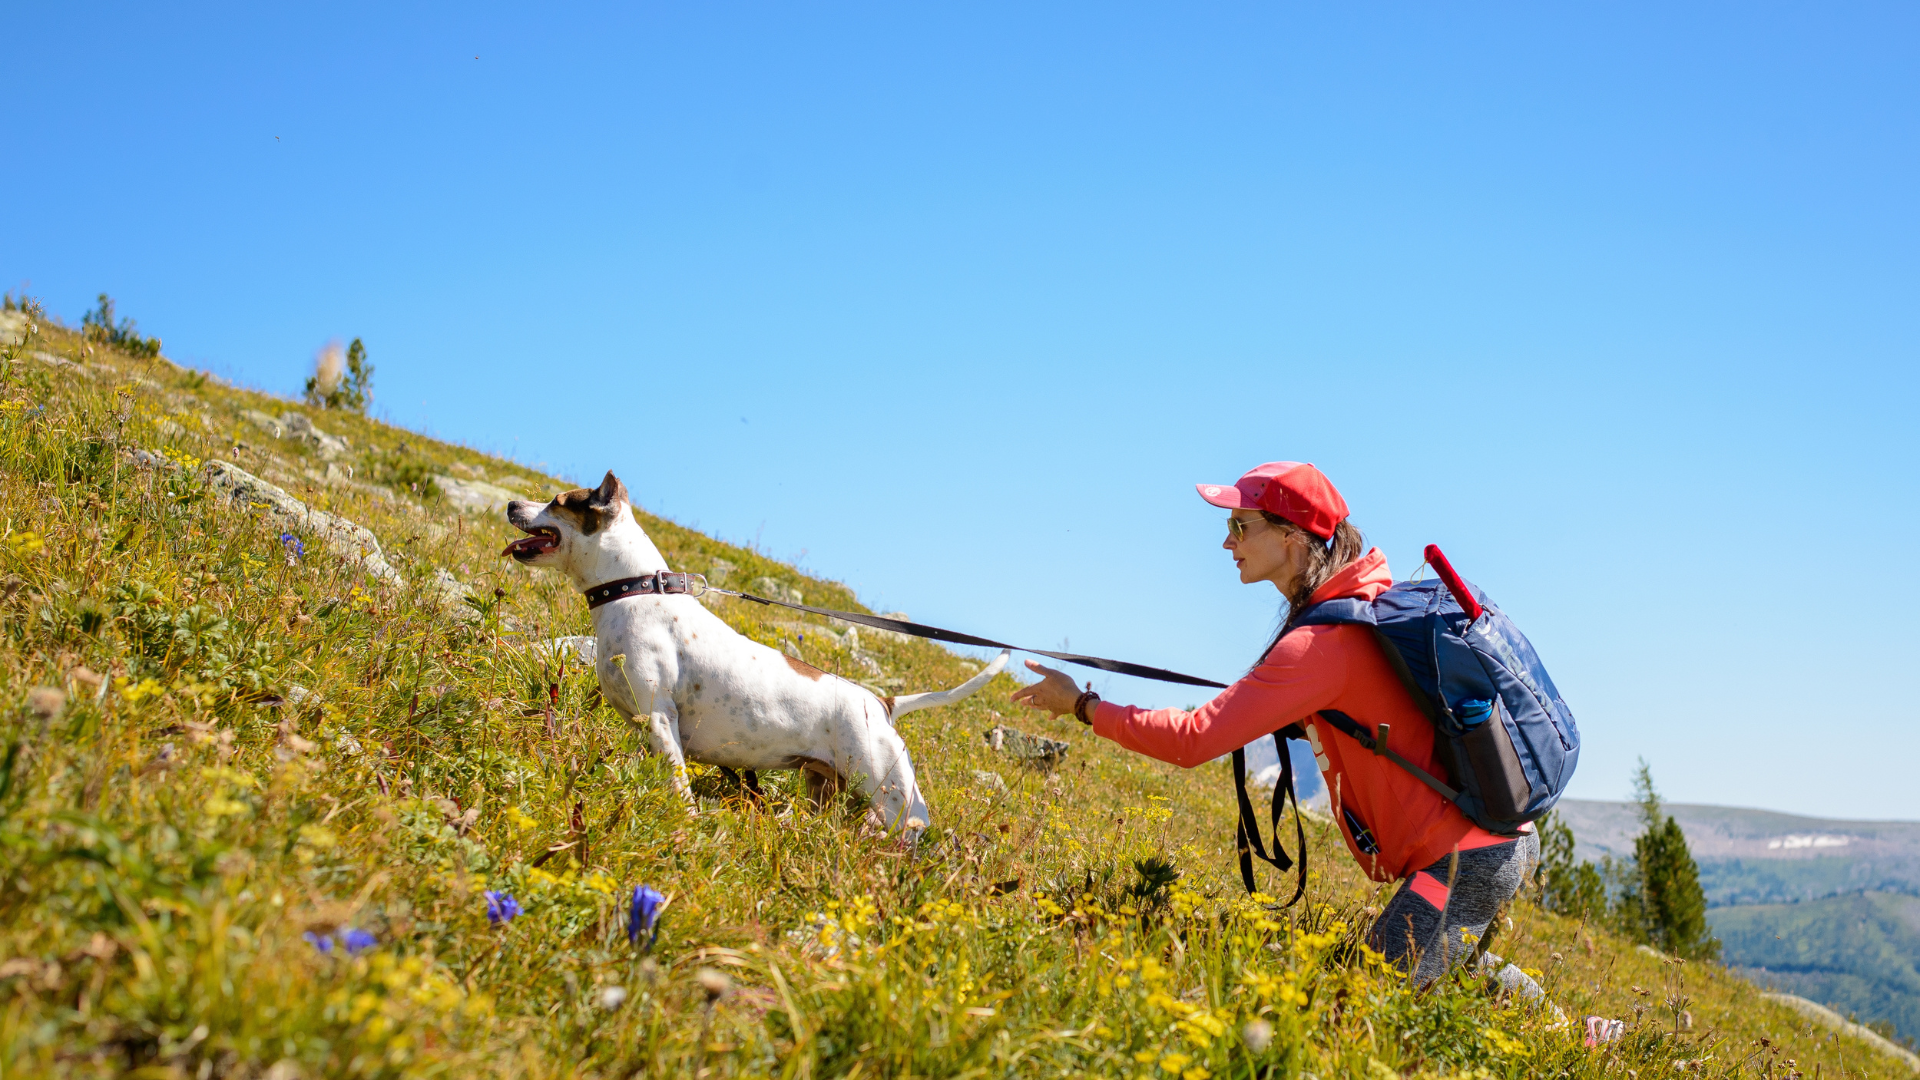 Planning a Multi-Day Hike with Your Dog